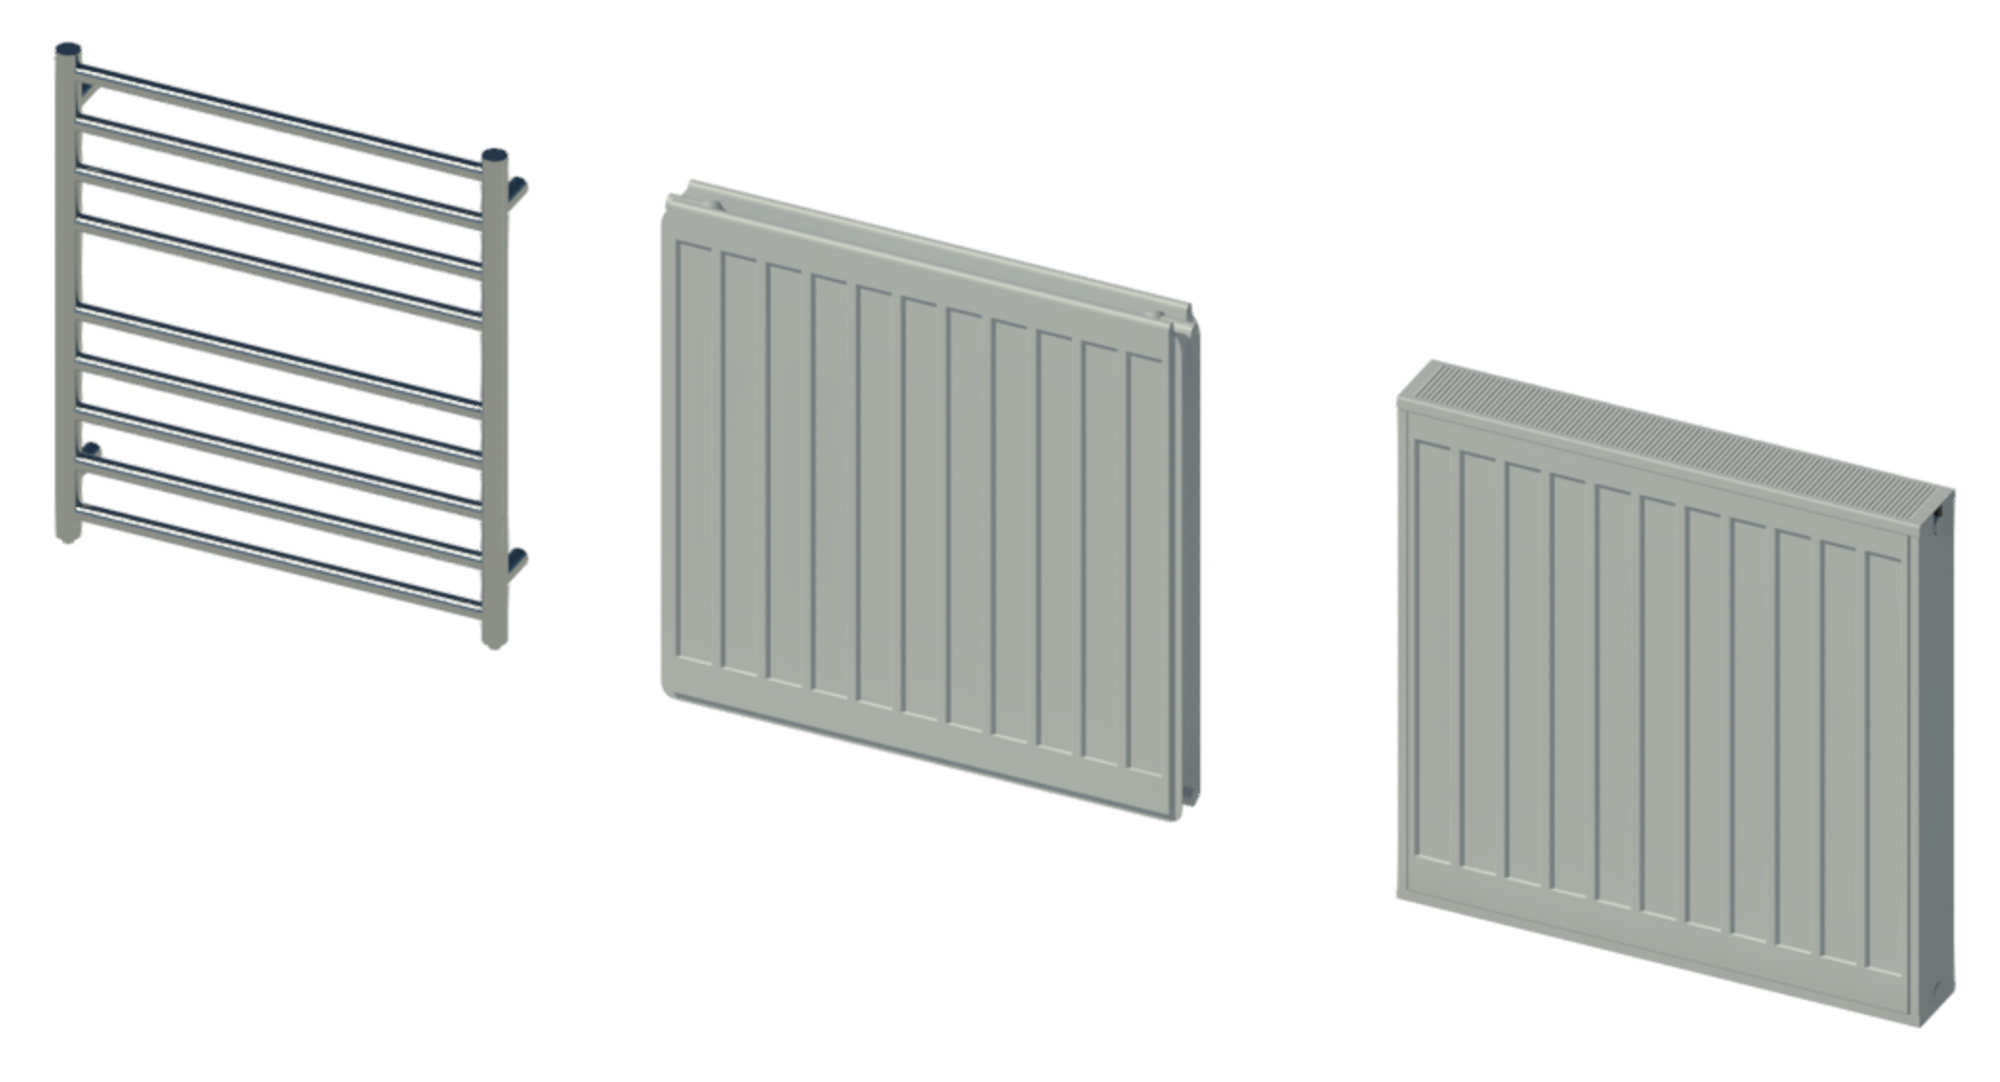 Raytrace showing DQ Heating towel rail and radiators from Myson and Stelrad.